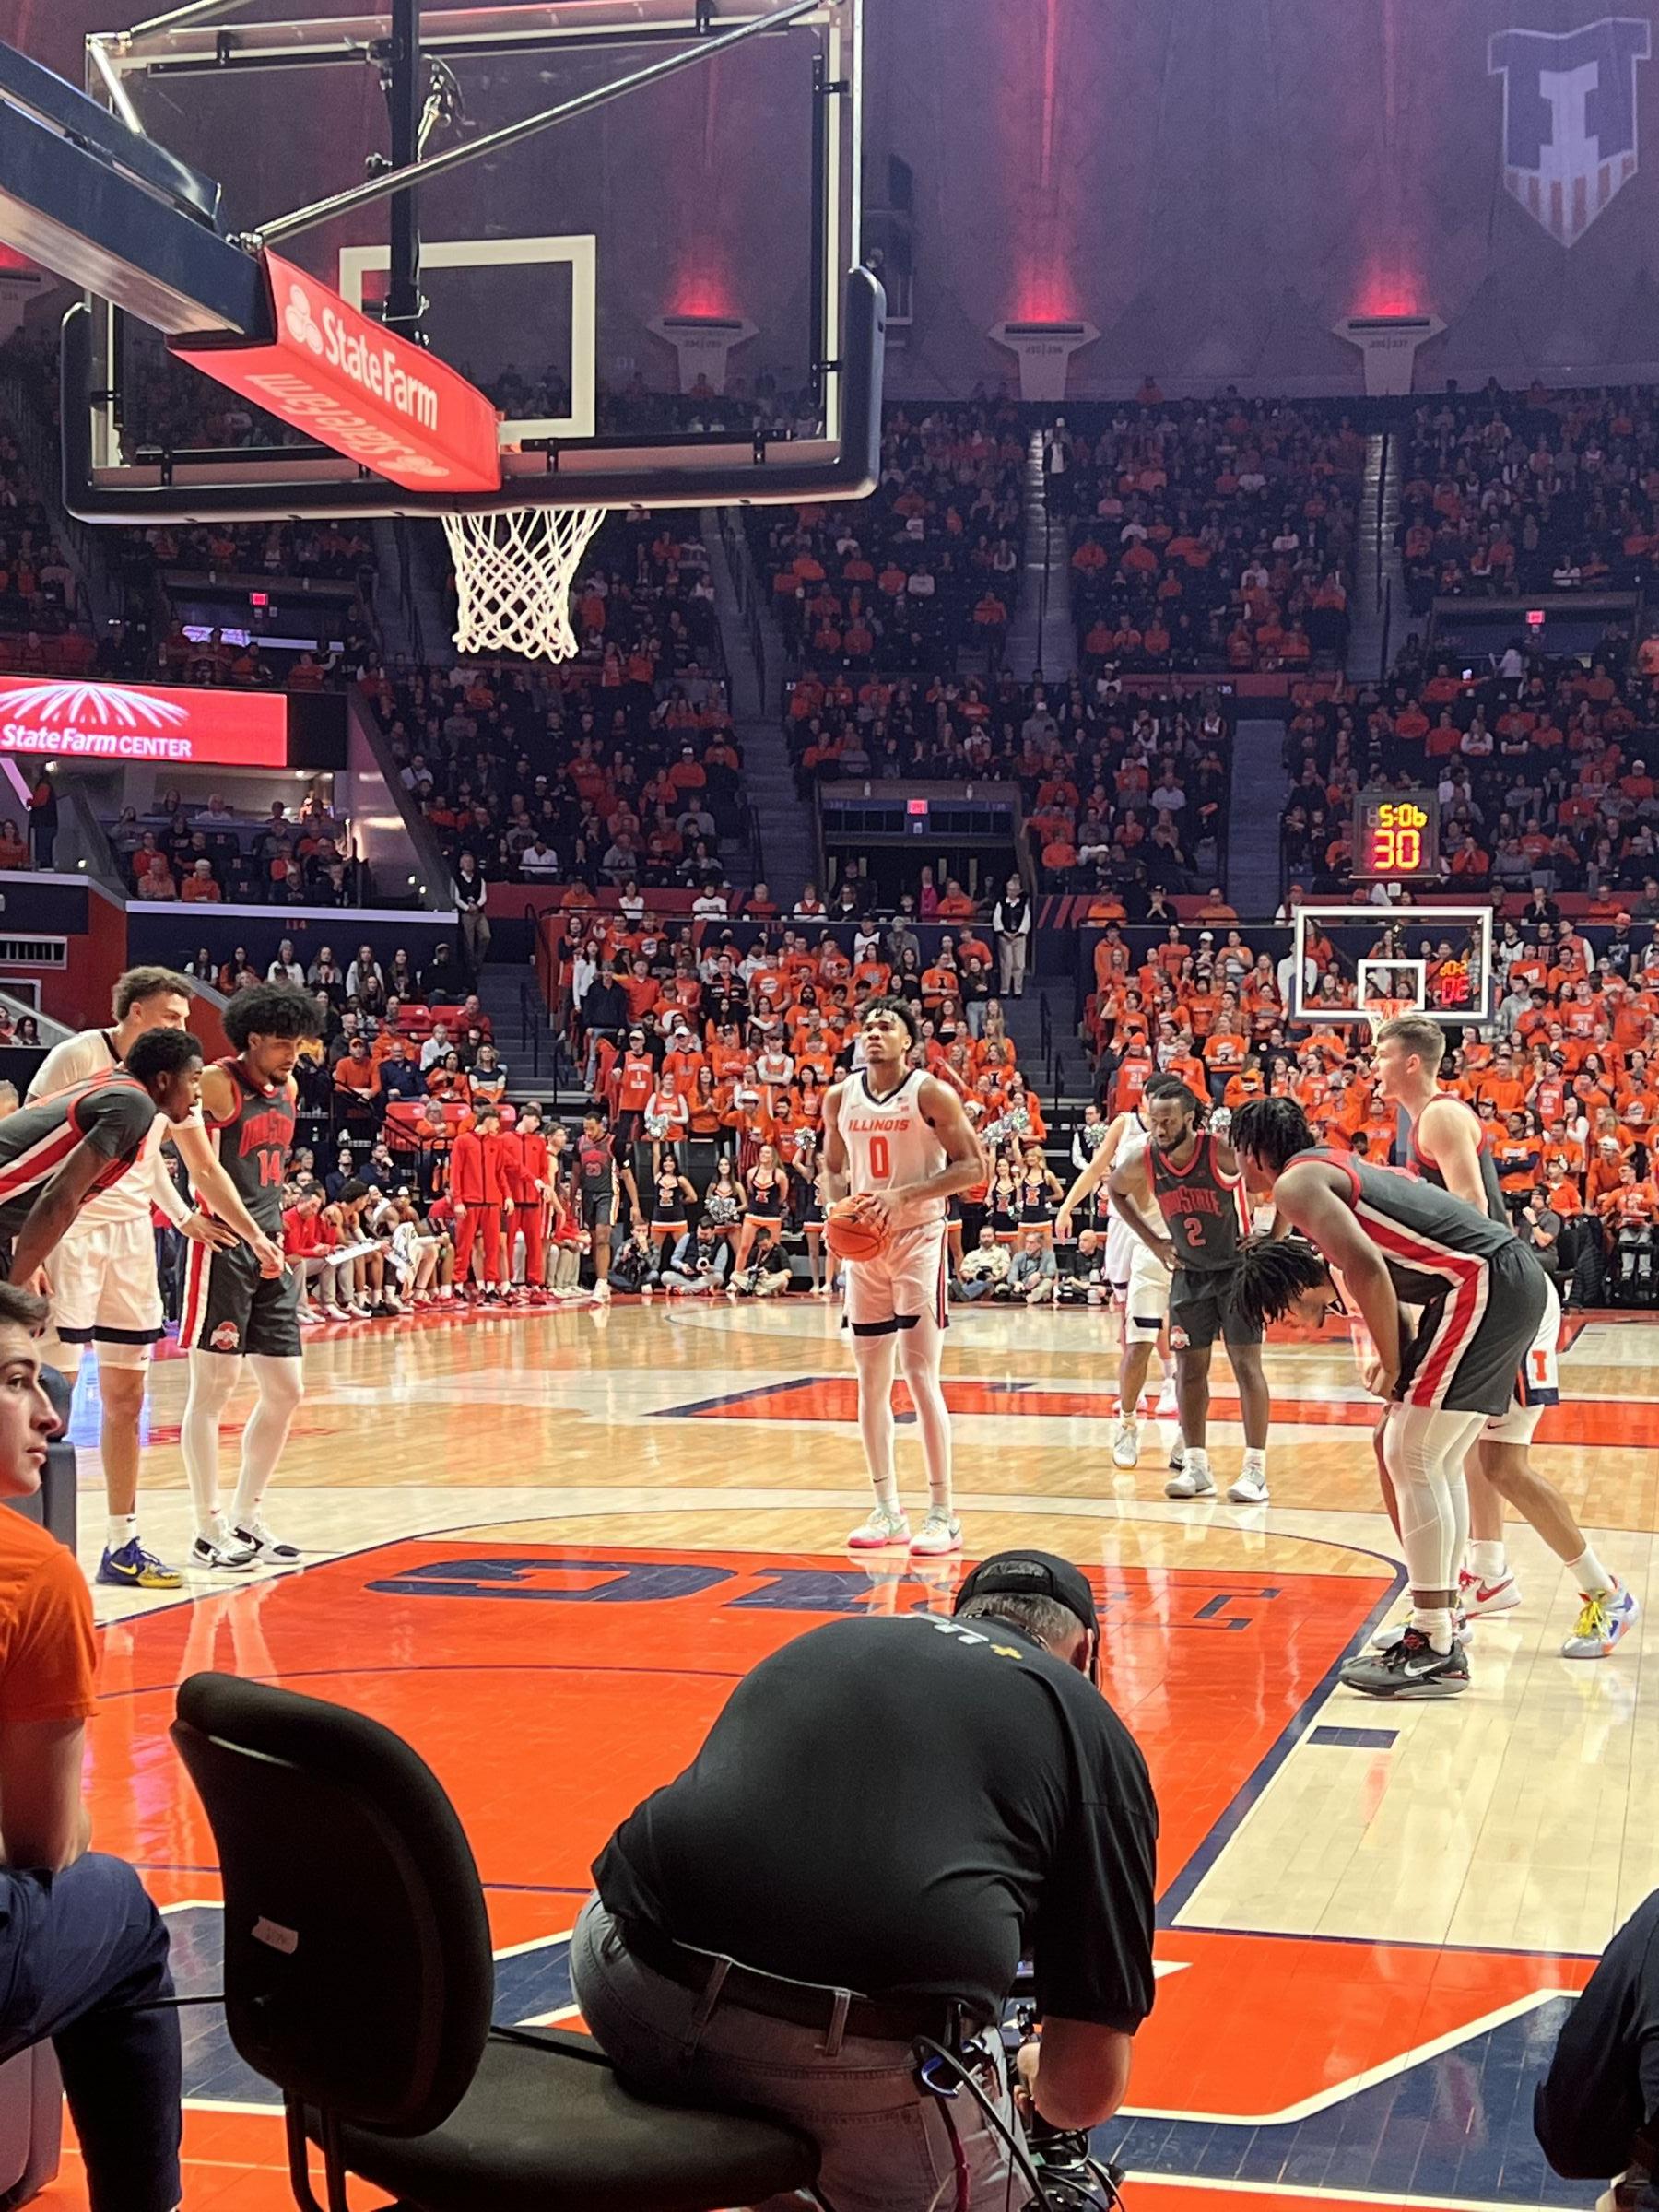 section 106, row 1 seat view  - state farm center